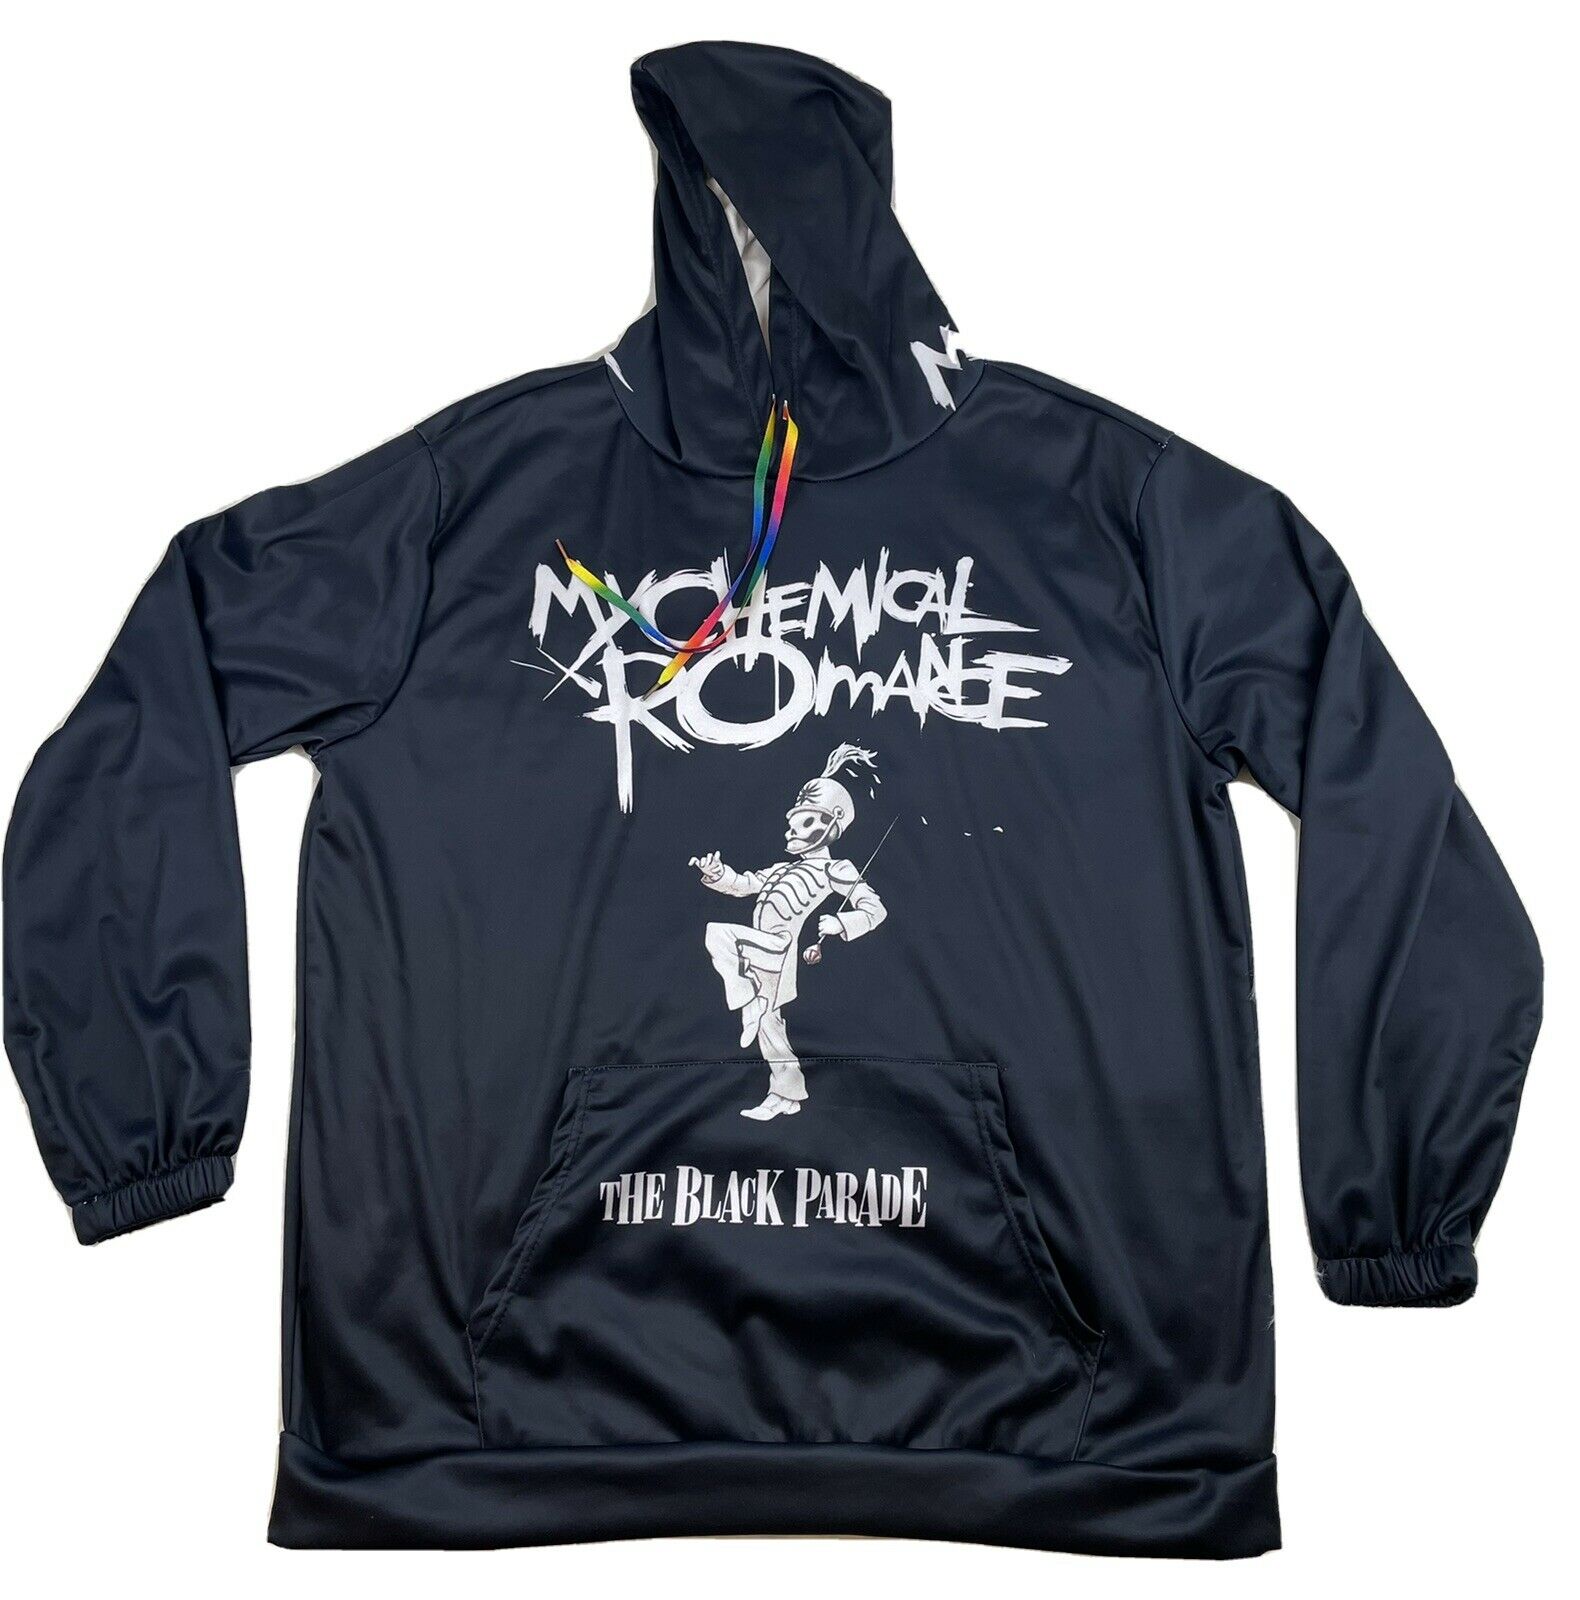 My Chemical Romance The Black Parade Pullover Hoodie Adult Size 3xl - Euc Rare!